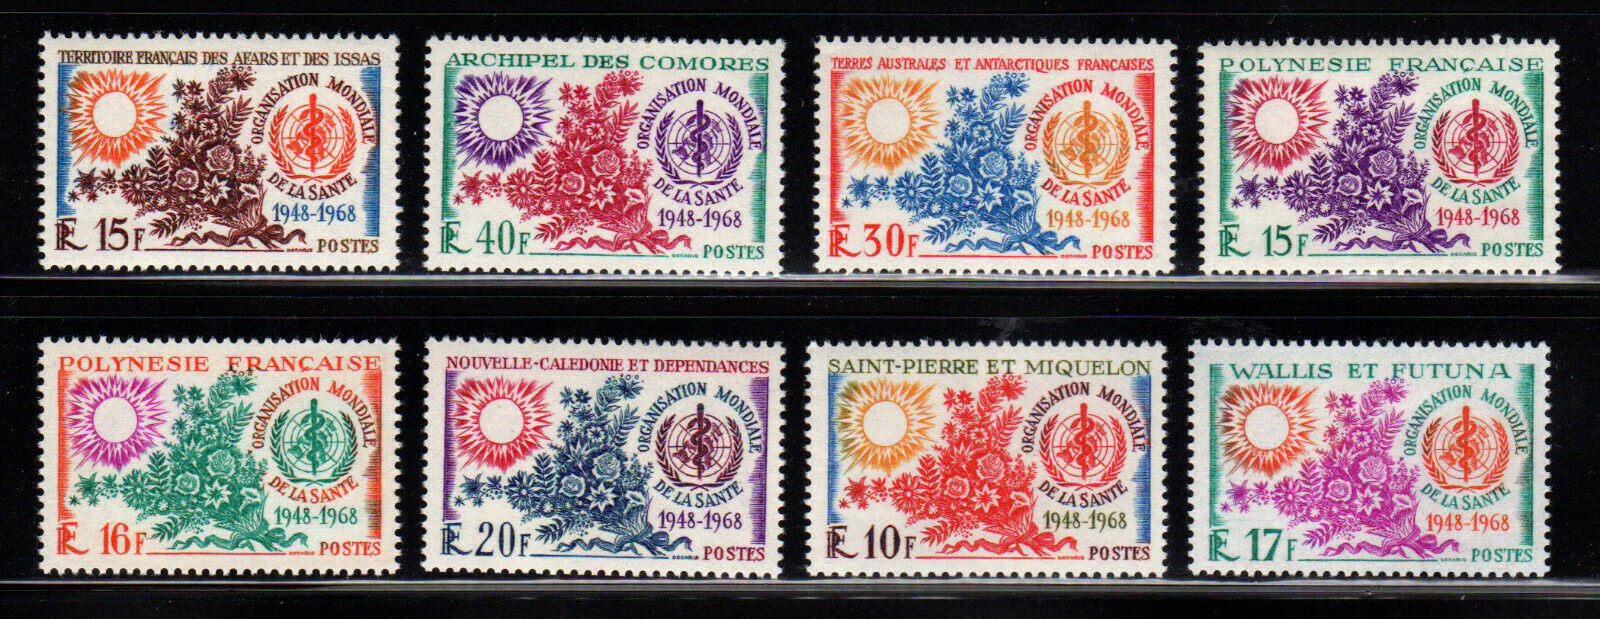 1968 French Colonies Omnibus W H O Anniversary Complete Mnh